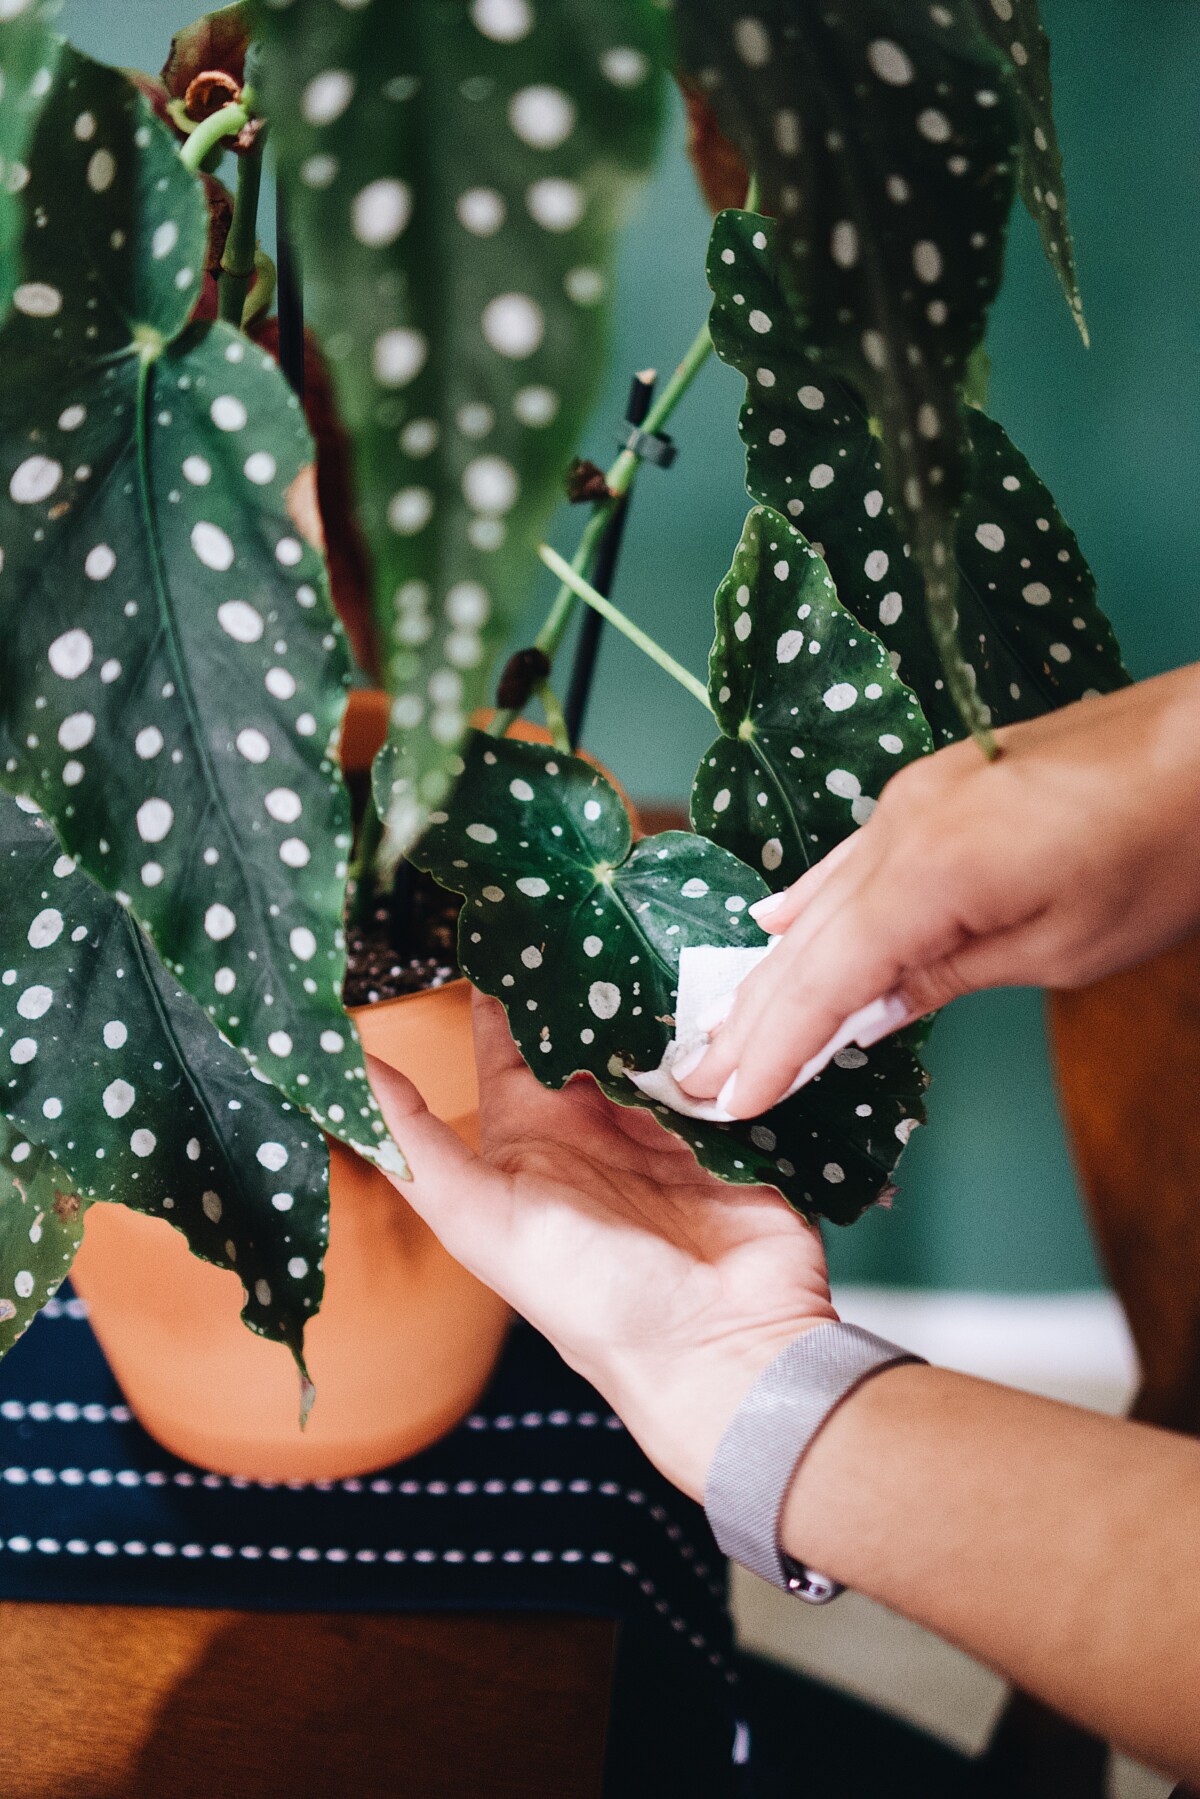 Woman's hands cleaning a begonia rex